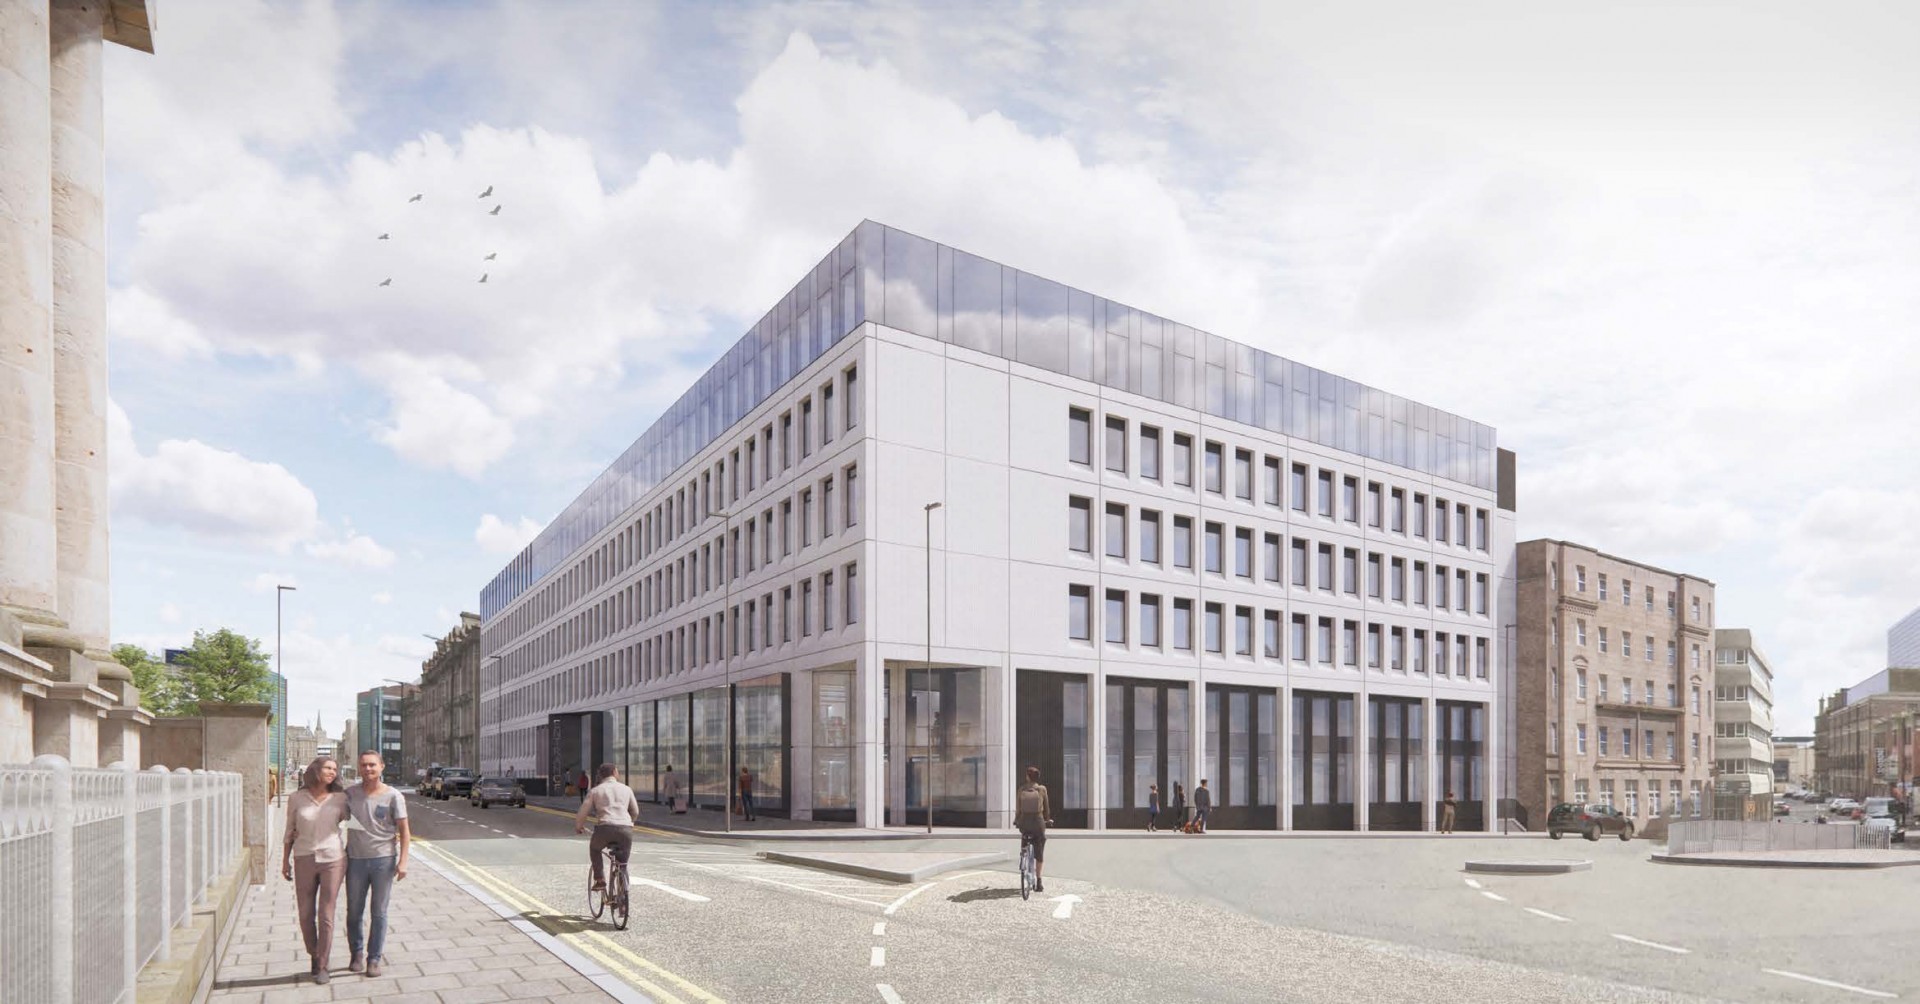 Dundee student accommodation complex given approval